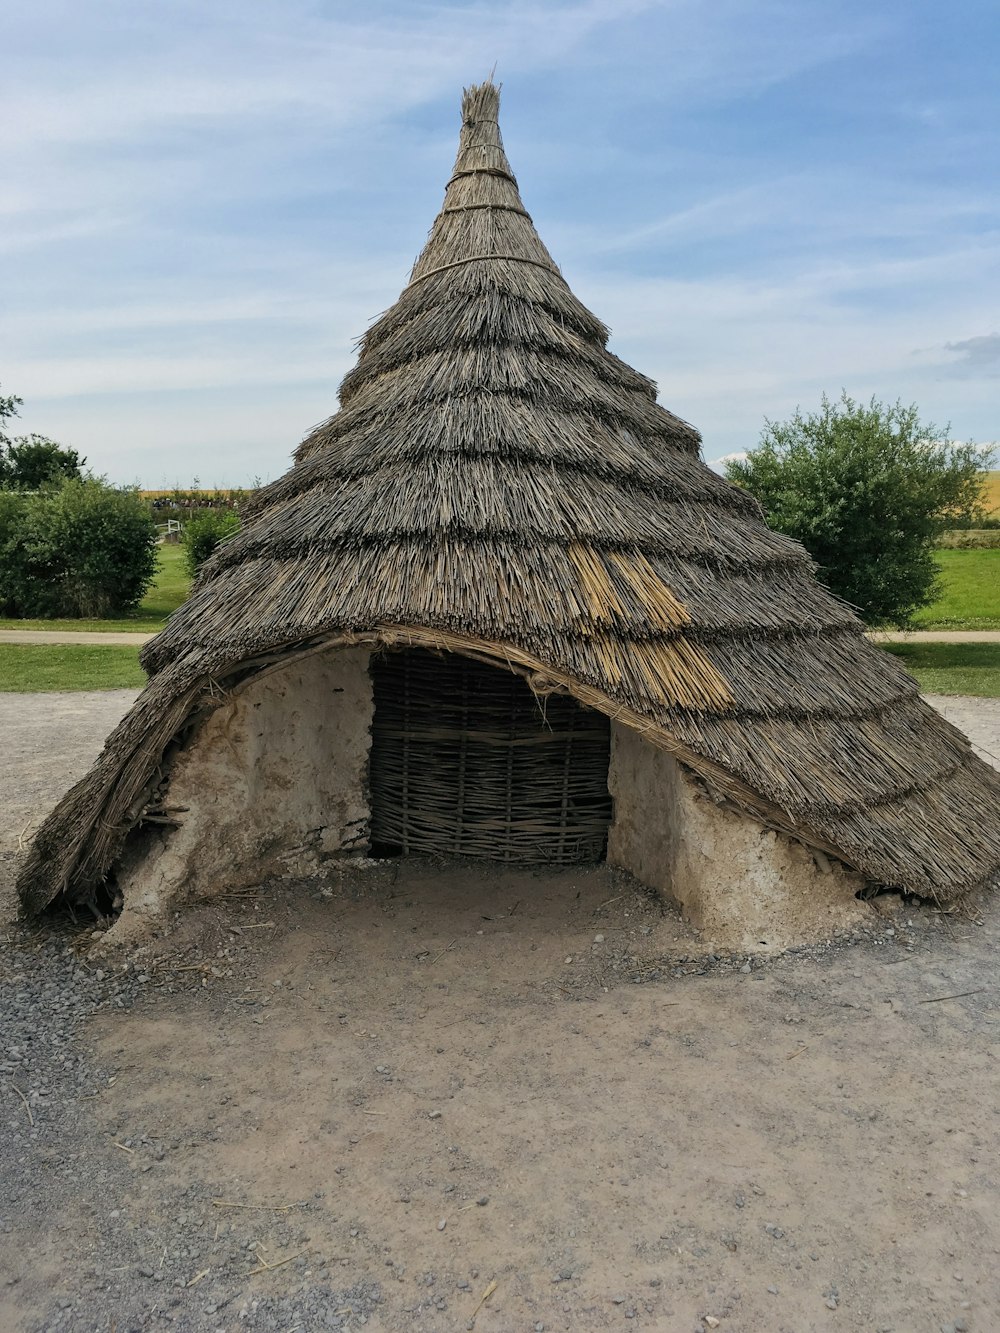 a hut with a thatched roof in a field